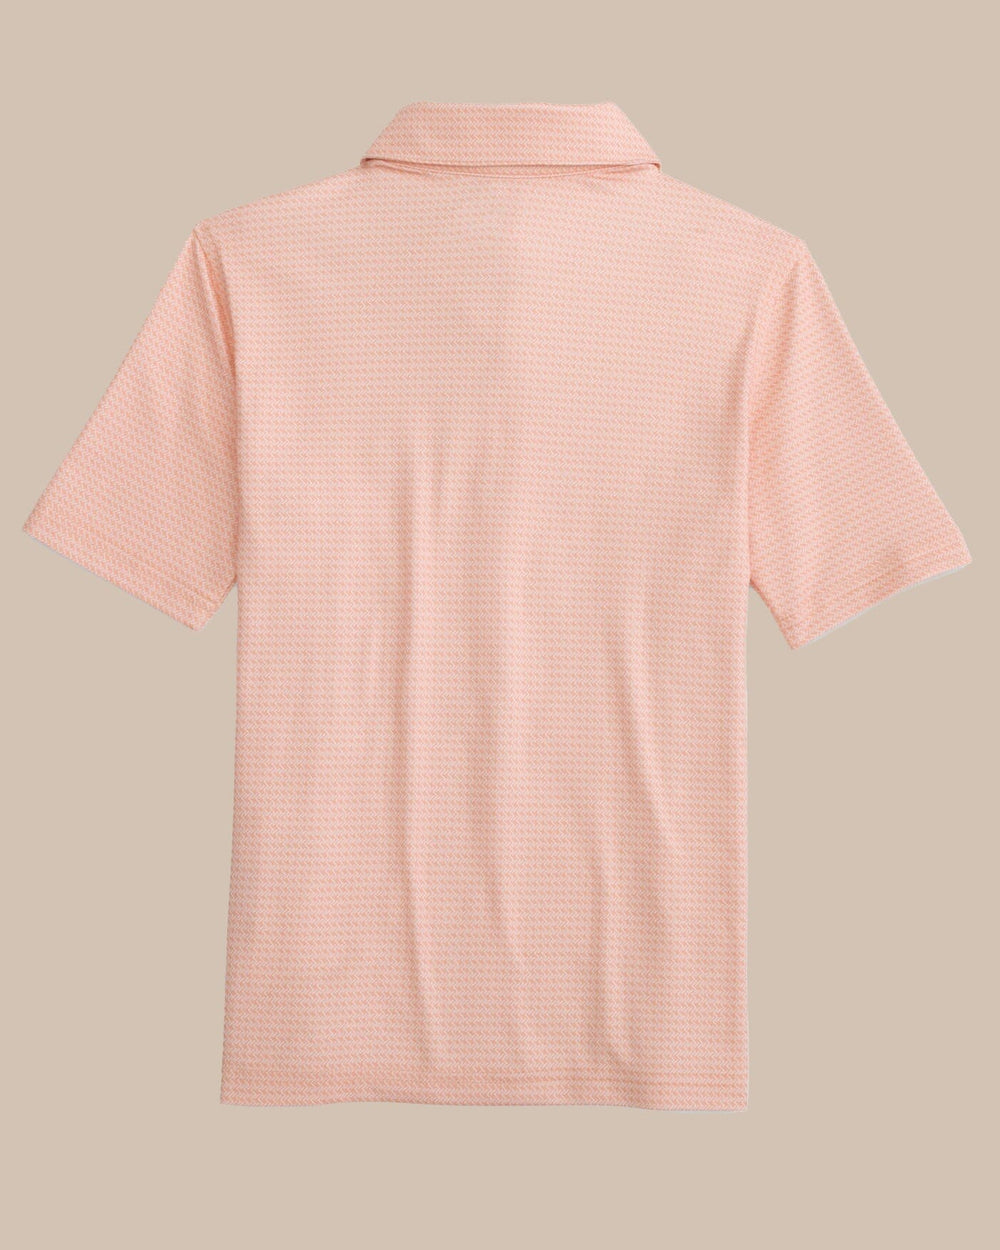 The back view of the Southern Tide Kids Driver Getting Ziggy With It Printed Polo by Southern Tide - Apricot Blush Coral